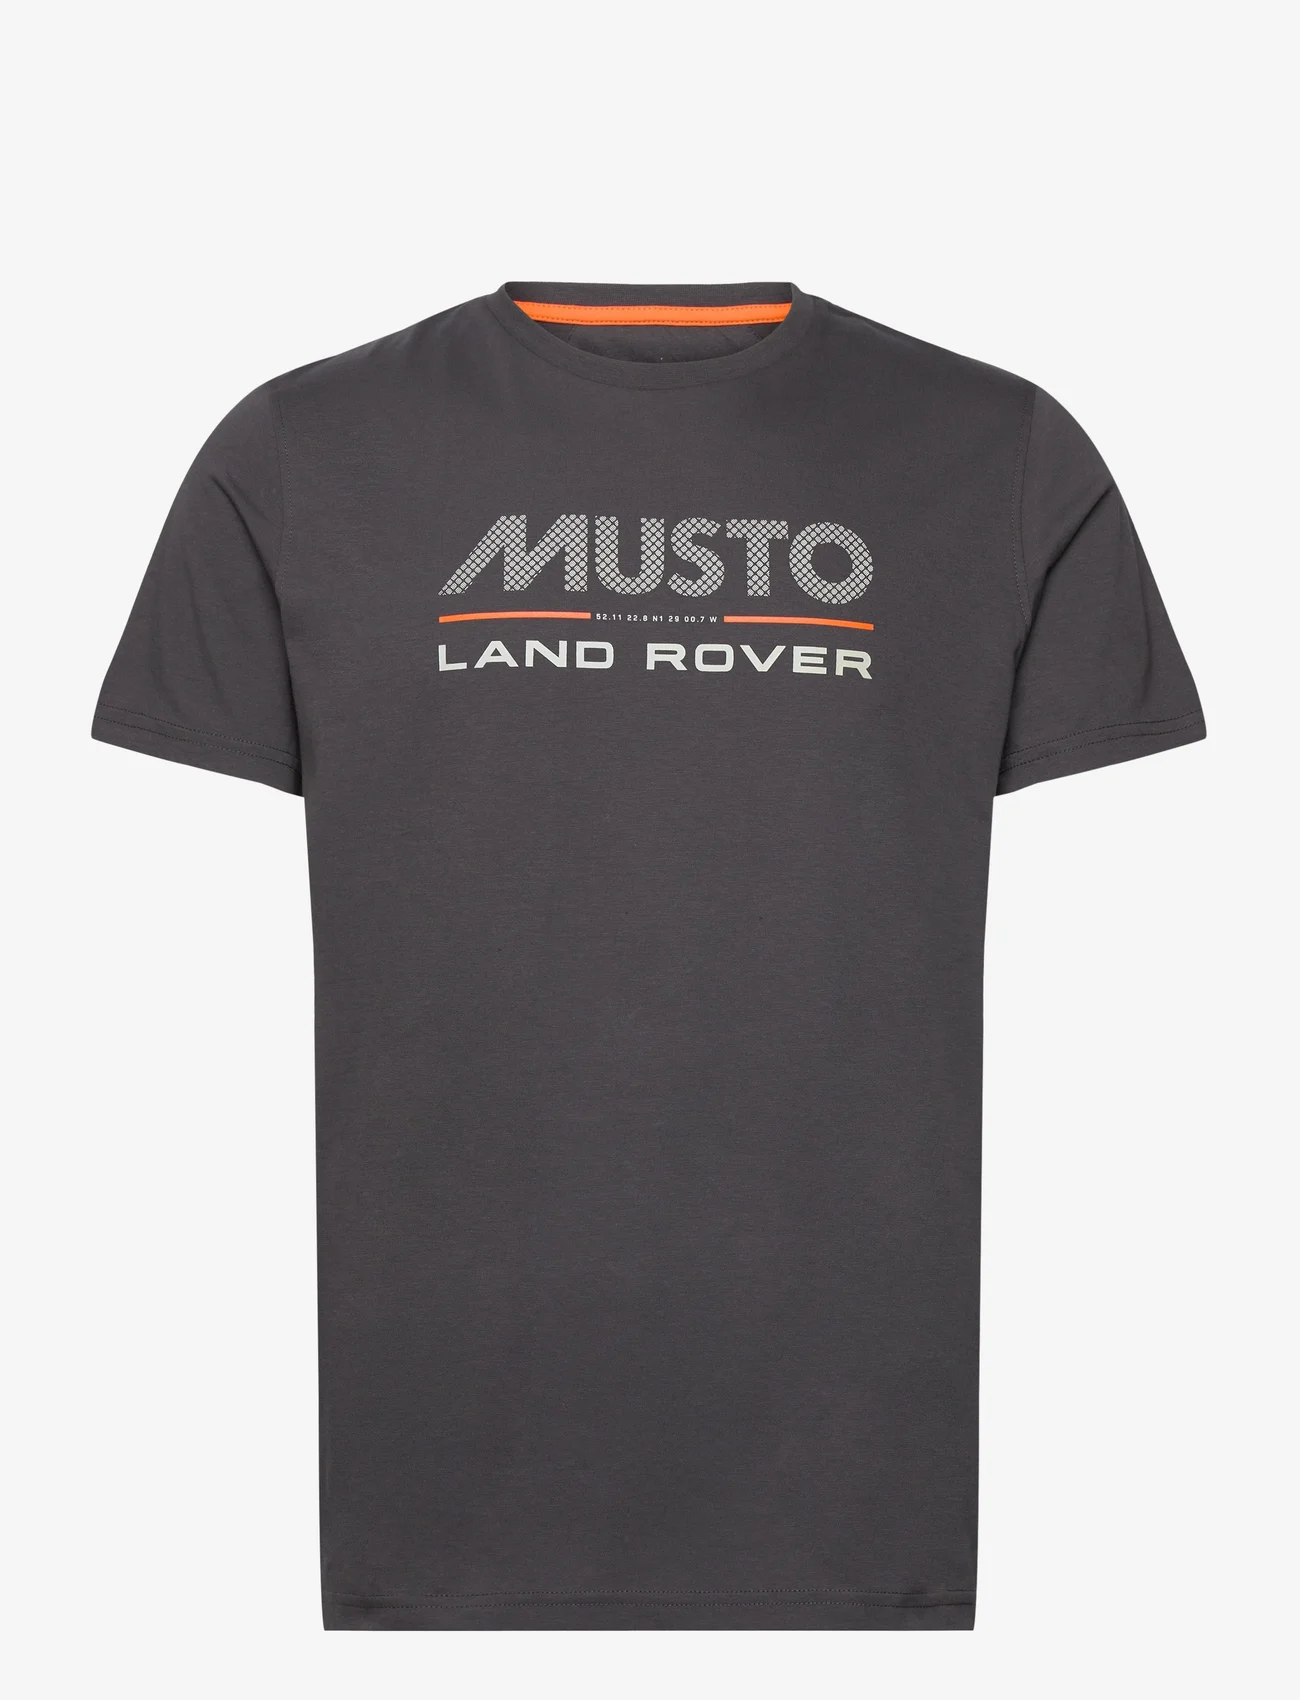 Musto - M LR LOGO SS TEE 2.0 - lowest prices - carbon - 0